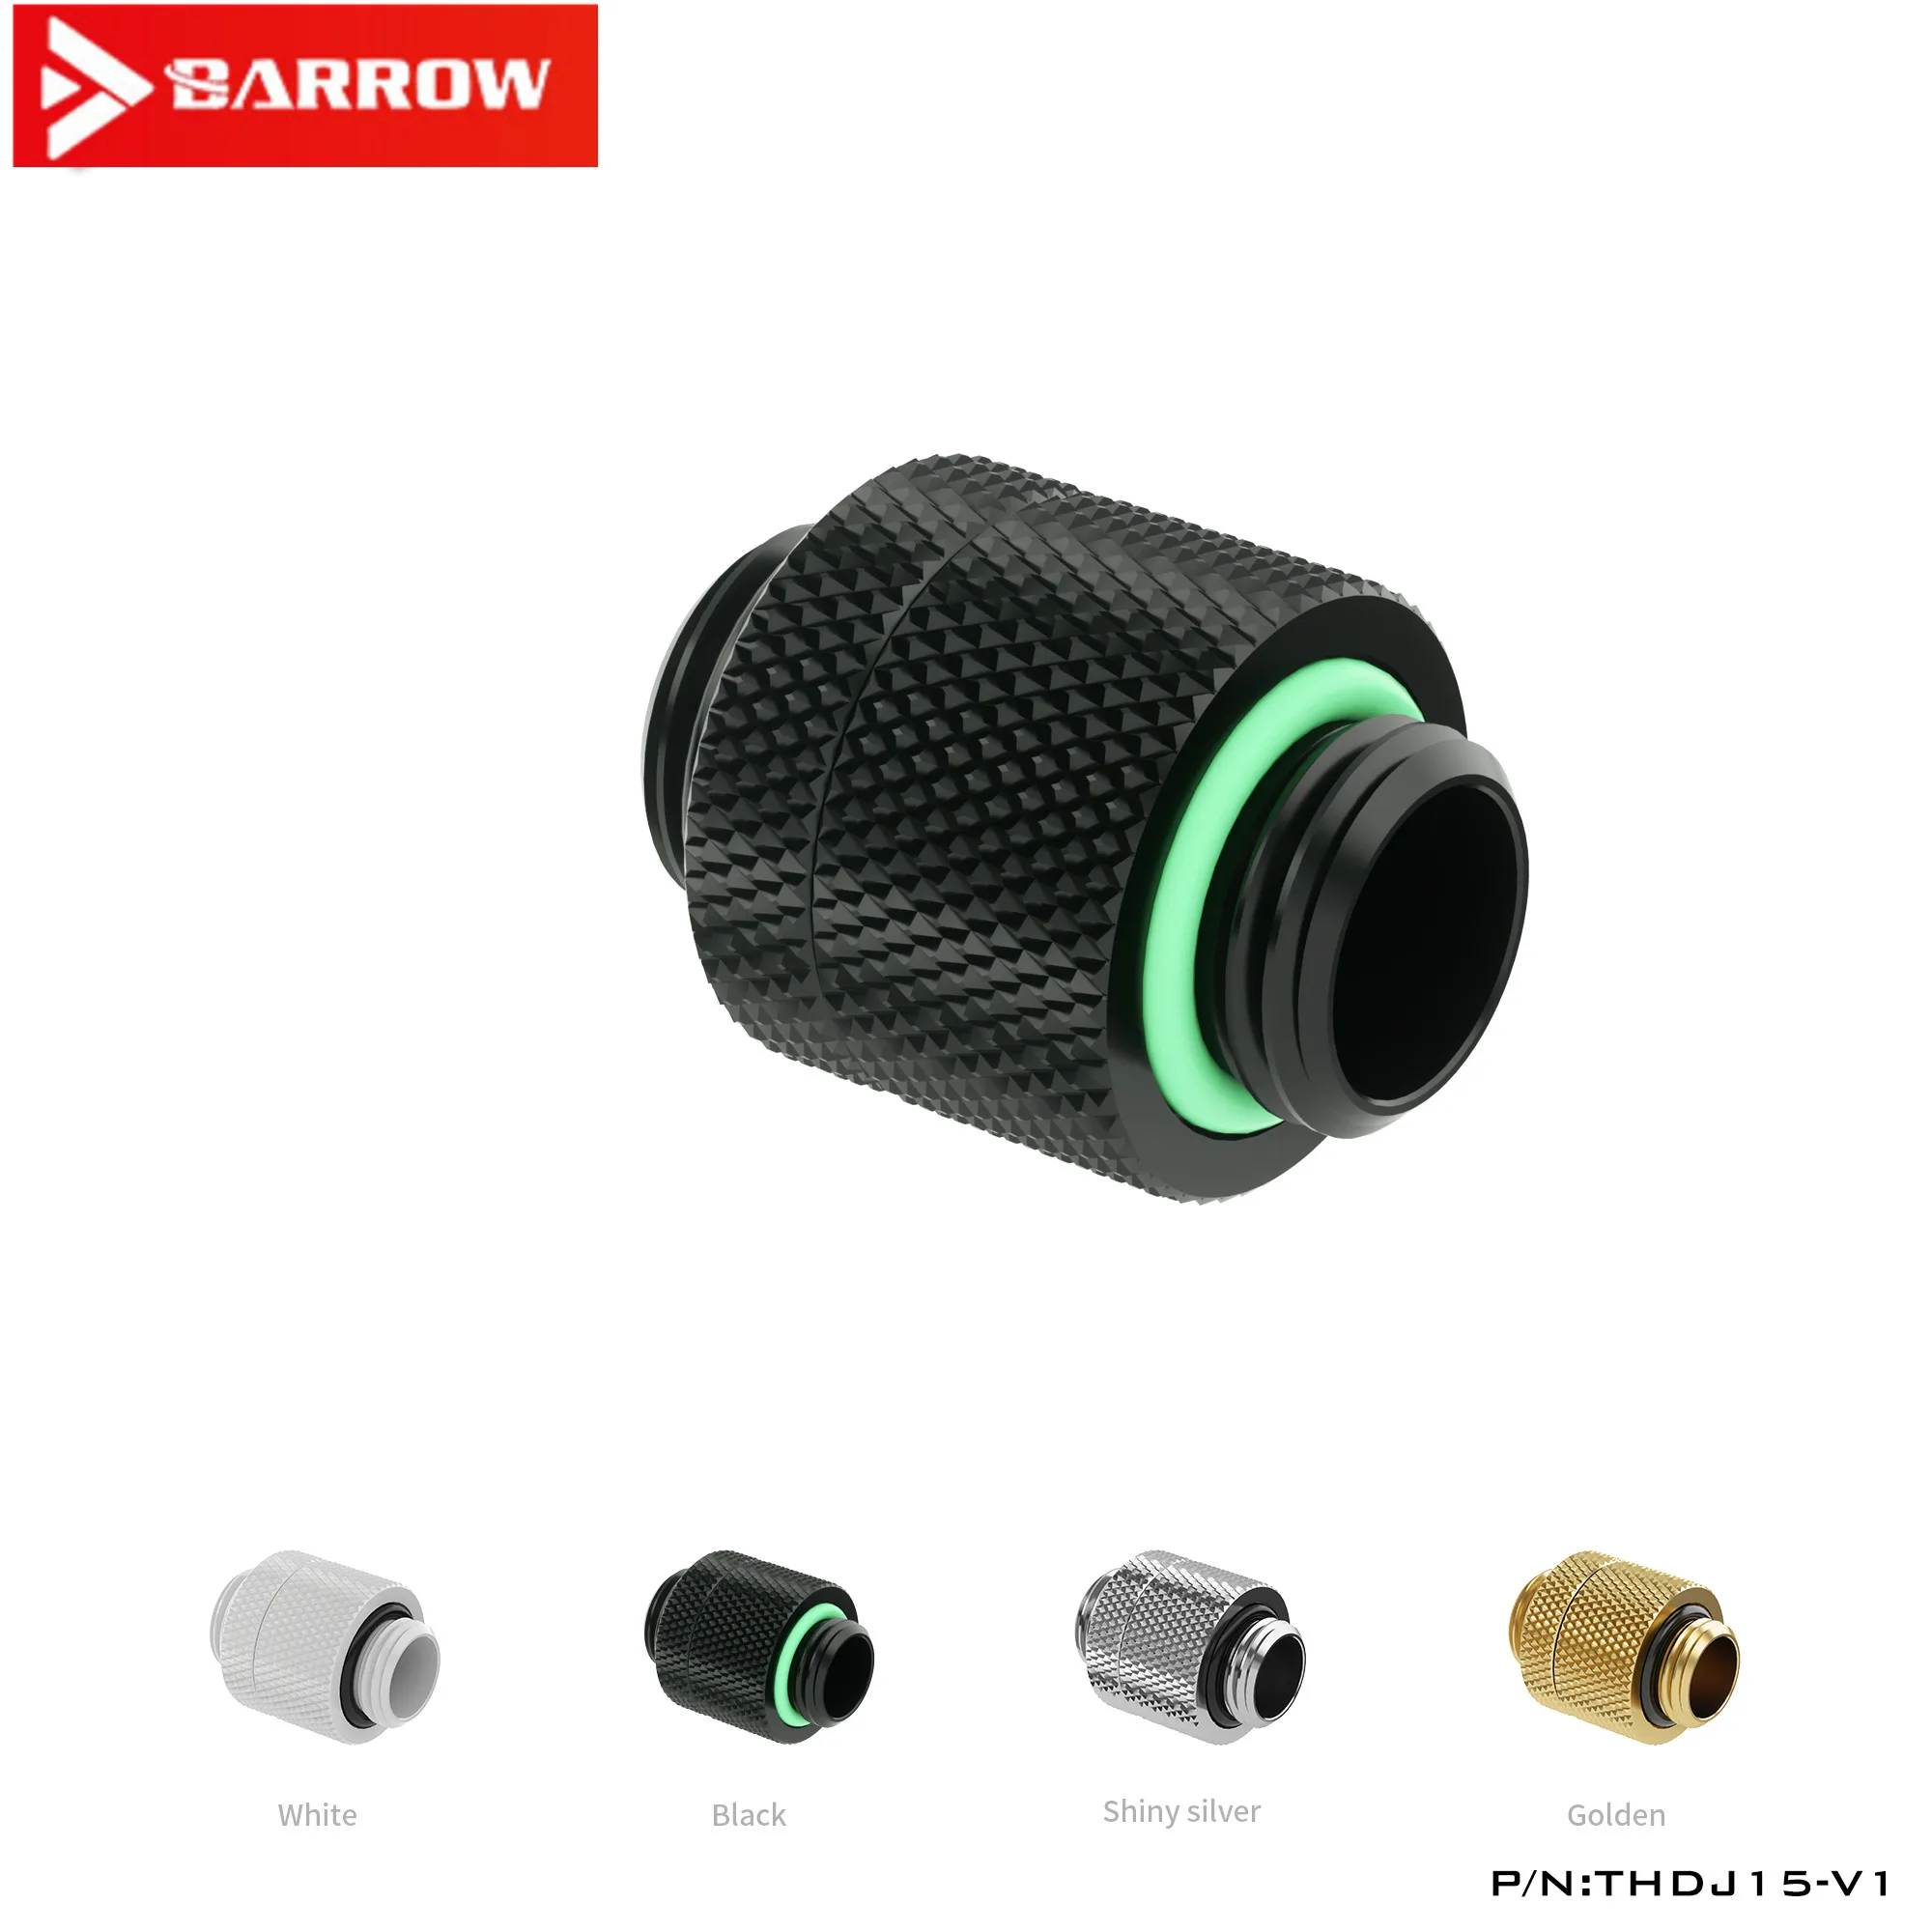 

Barrow Multi-Function Flexiable G1/4 Male to Male Rotary Connector,15-16.5mm Extender PC water cooling build fittings,THDJ15-V1